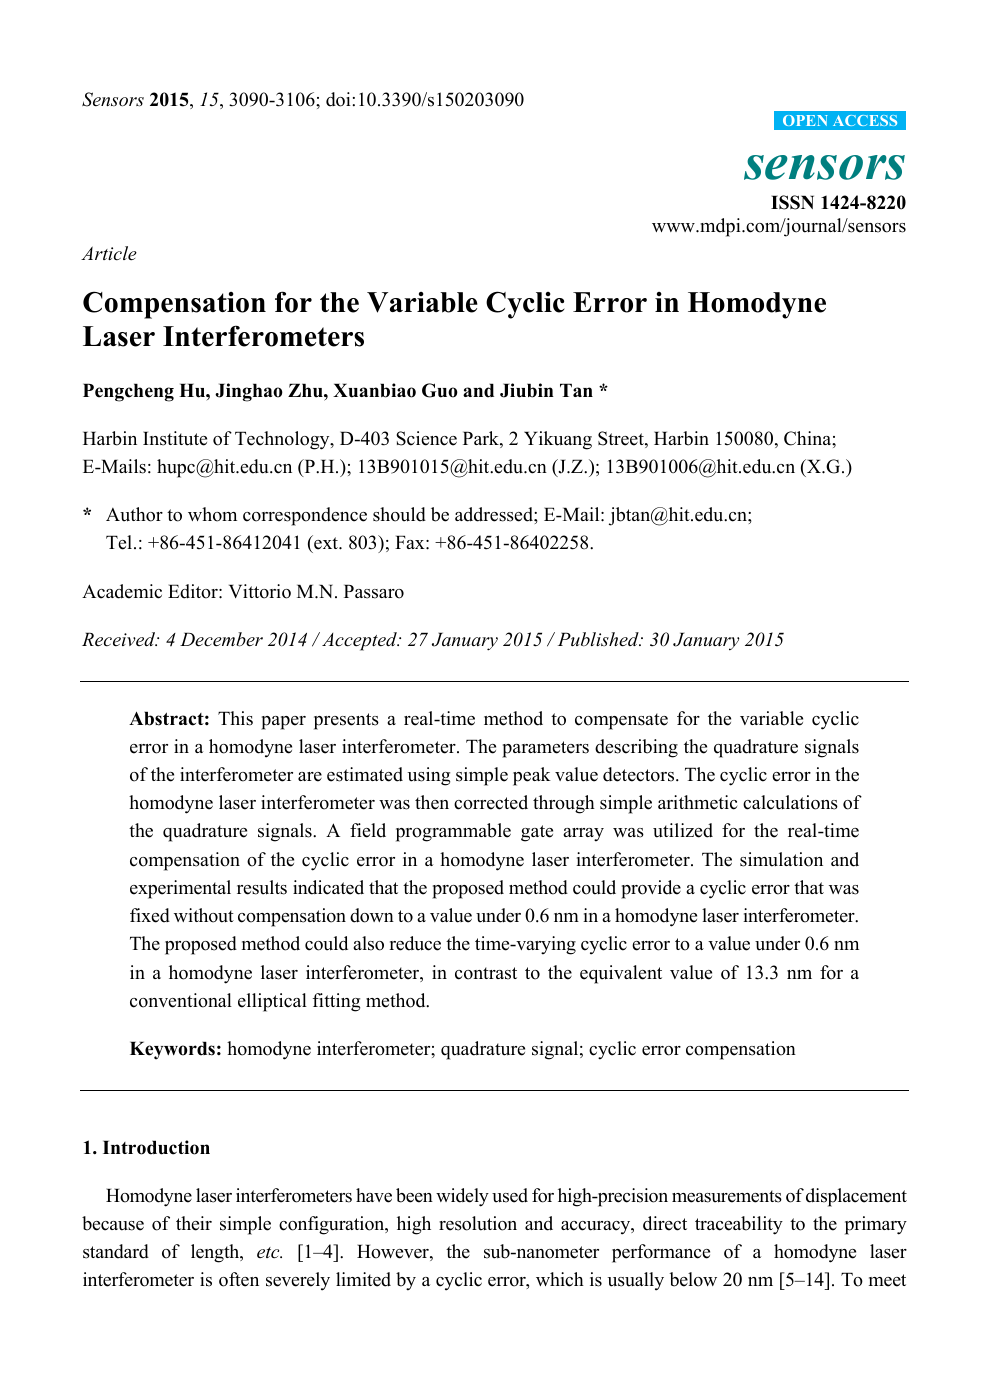 Compensation For The Variable Cyclic Error In Homodyne Laser Interferometers Topic Of Research Paper In Medical Engineering Download Scholarly Article Pdf And Read For Free On Cyberleninka Open Science Hub